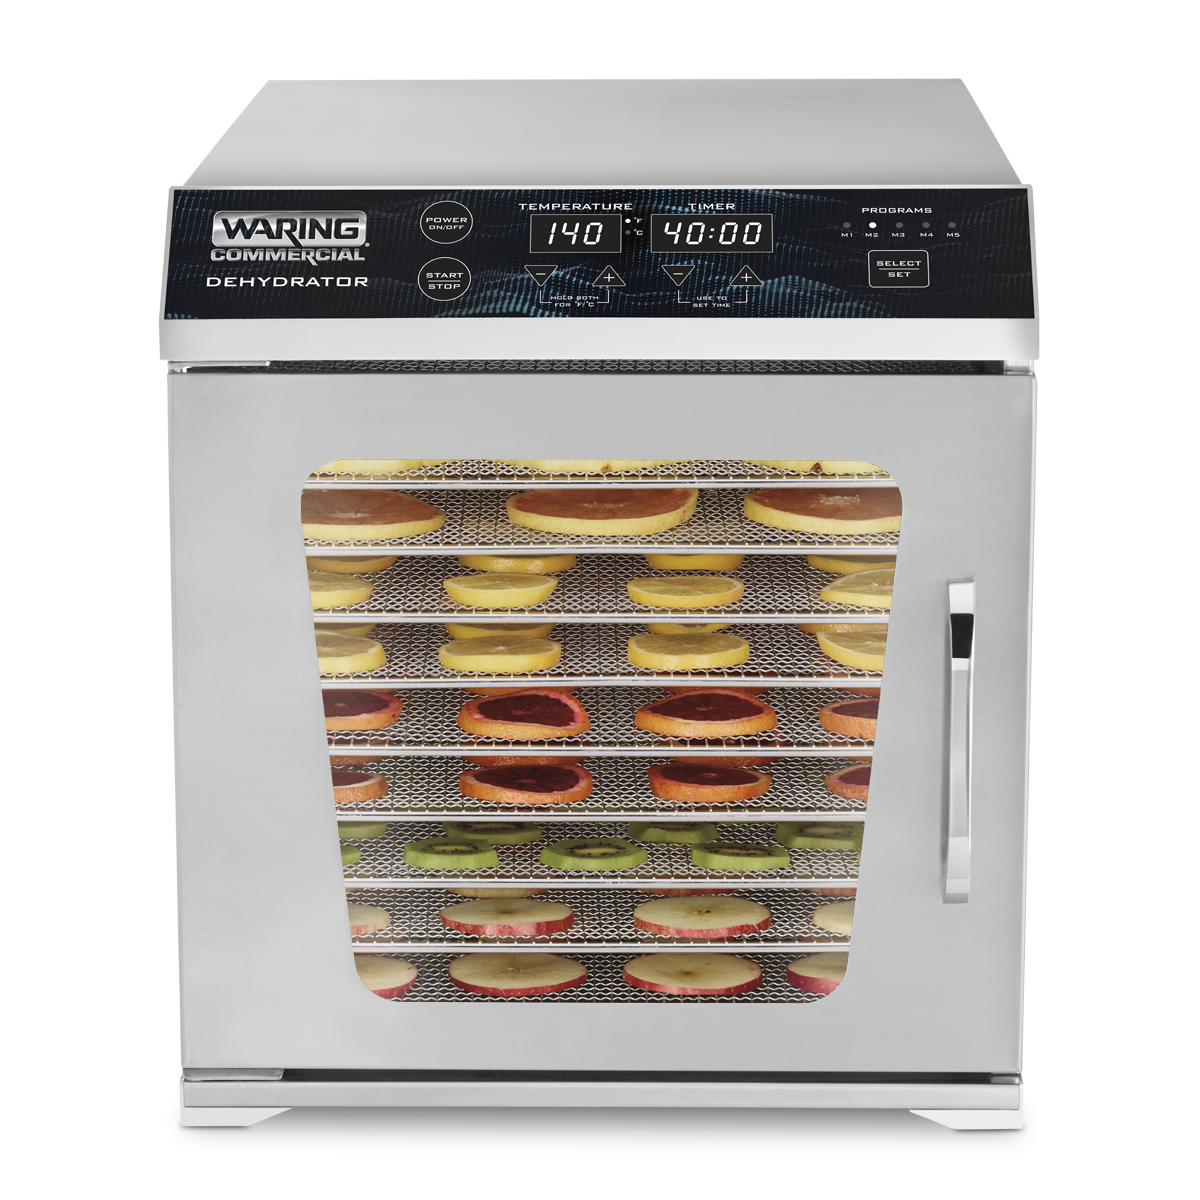 https://www.waringcommercialproducts.com/files/products/wdh10-waring-food-dehydrator-inset-3-1200x1200.jpg